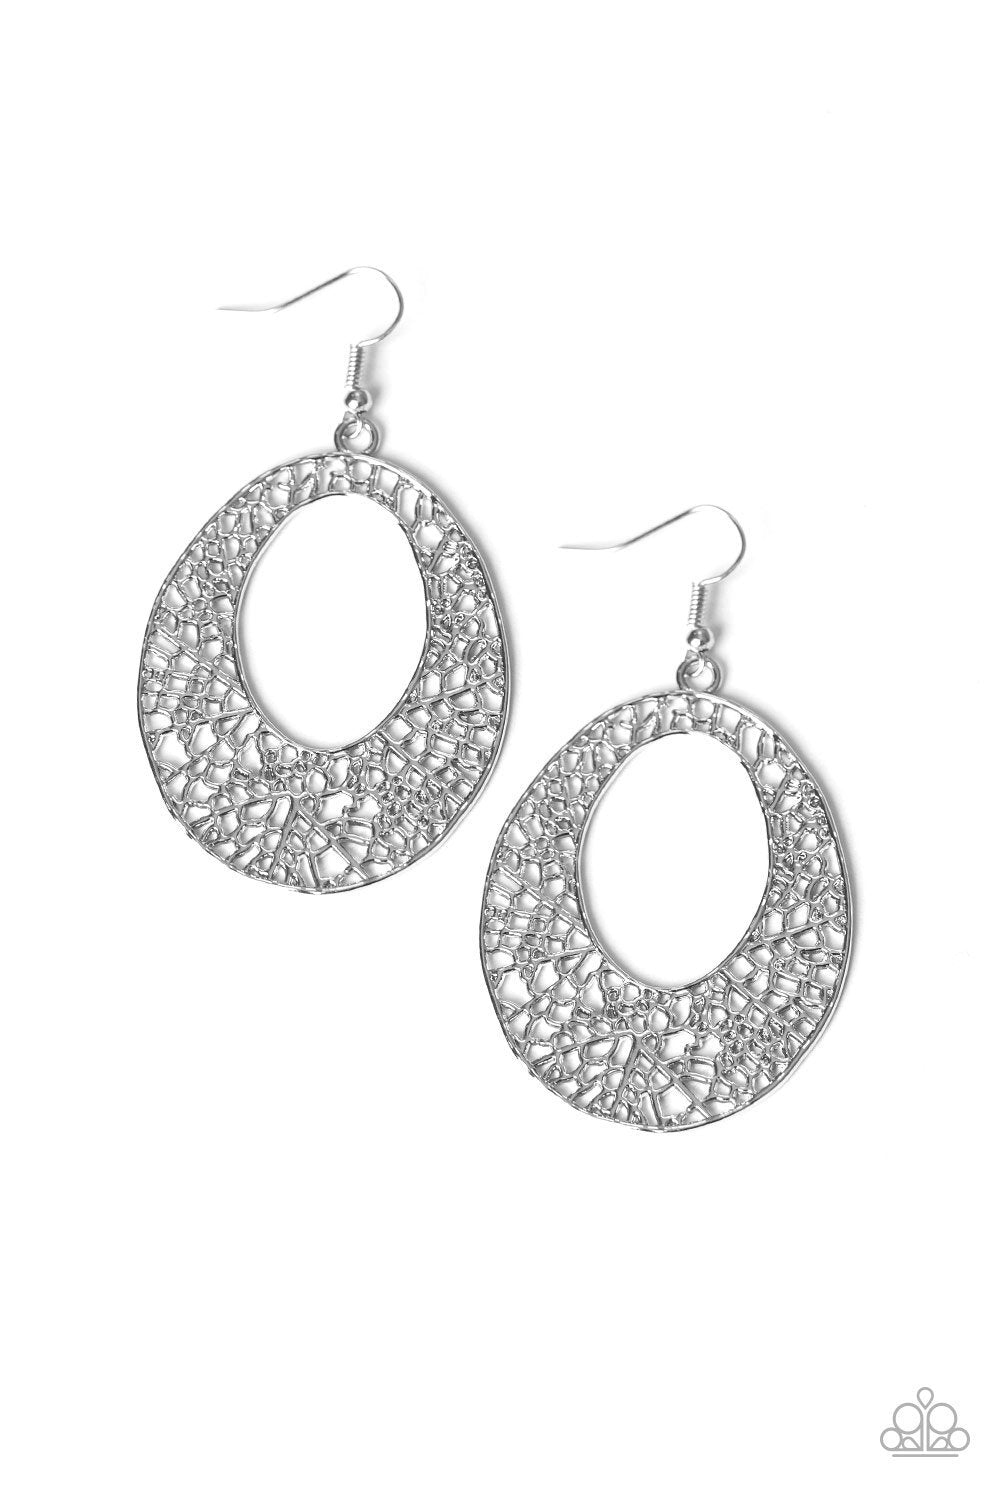 "Serenely Shattered" - Silver #442 - Paparazzi Accessories